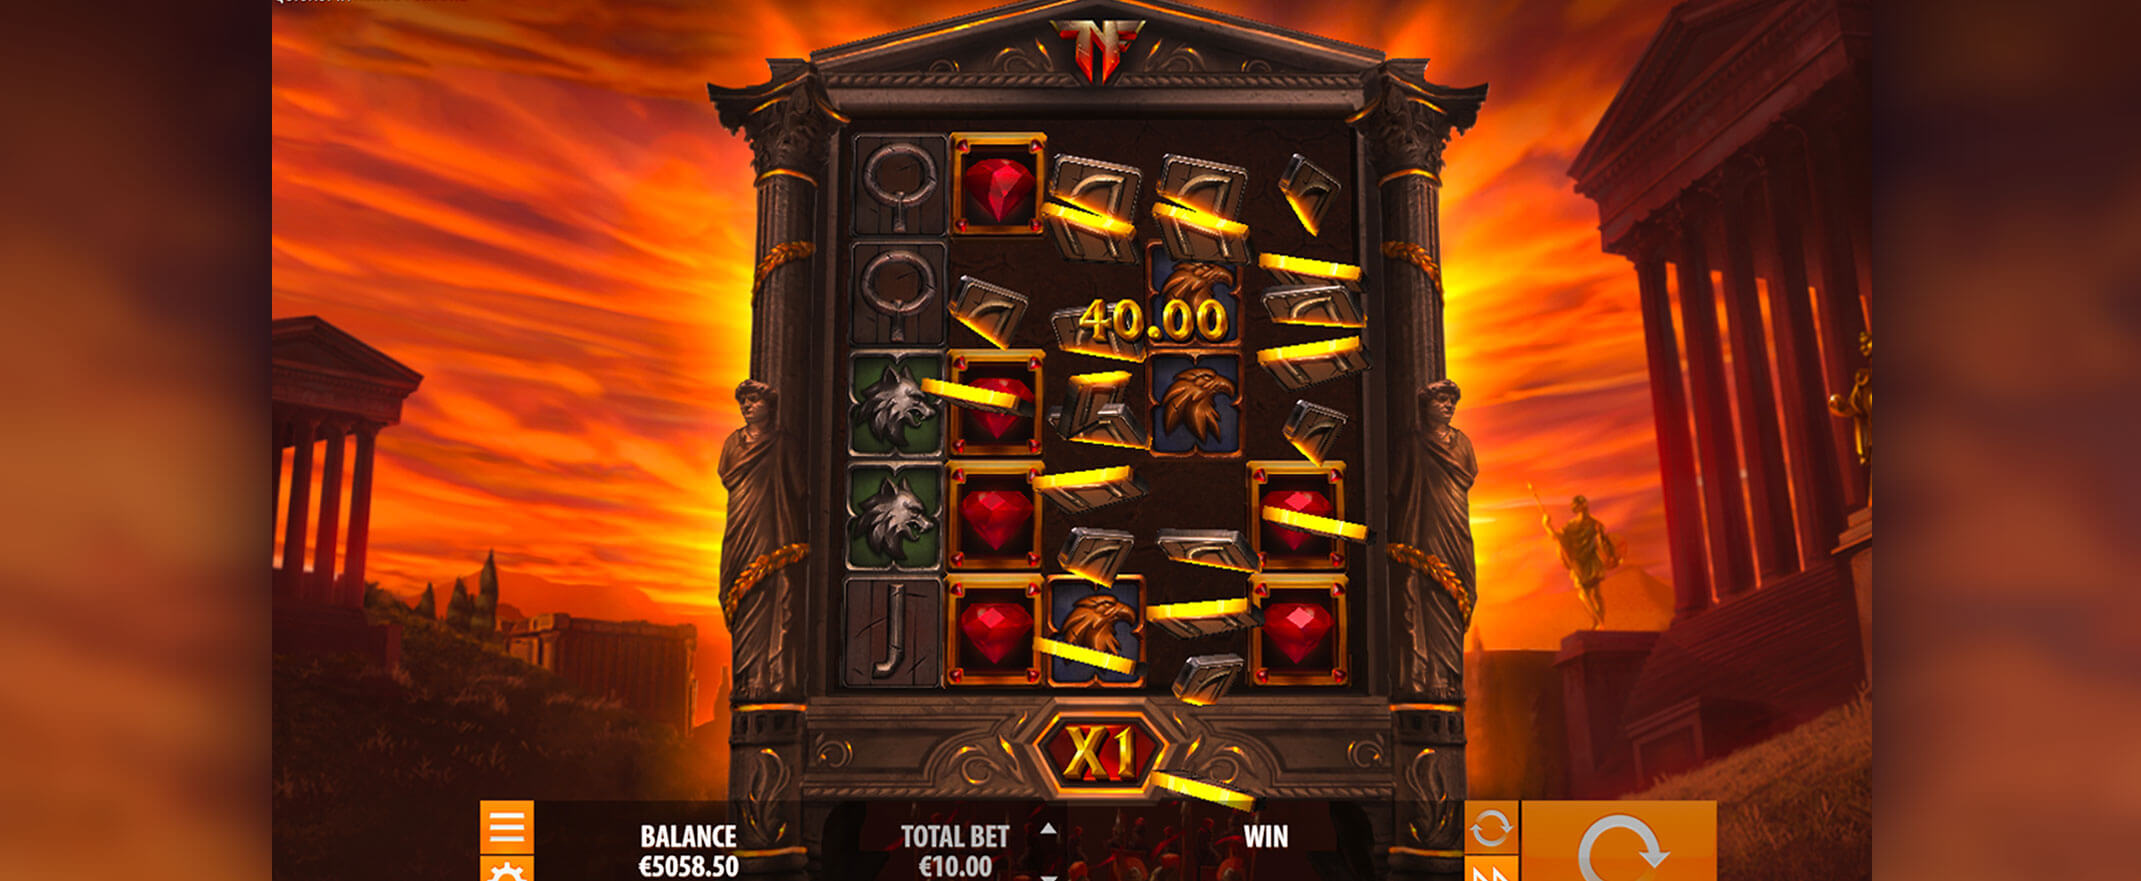 Nero’s Fortune Slot Review, image of the reels and symbols